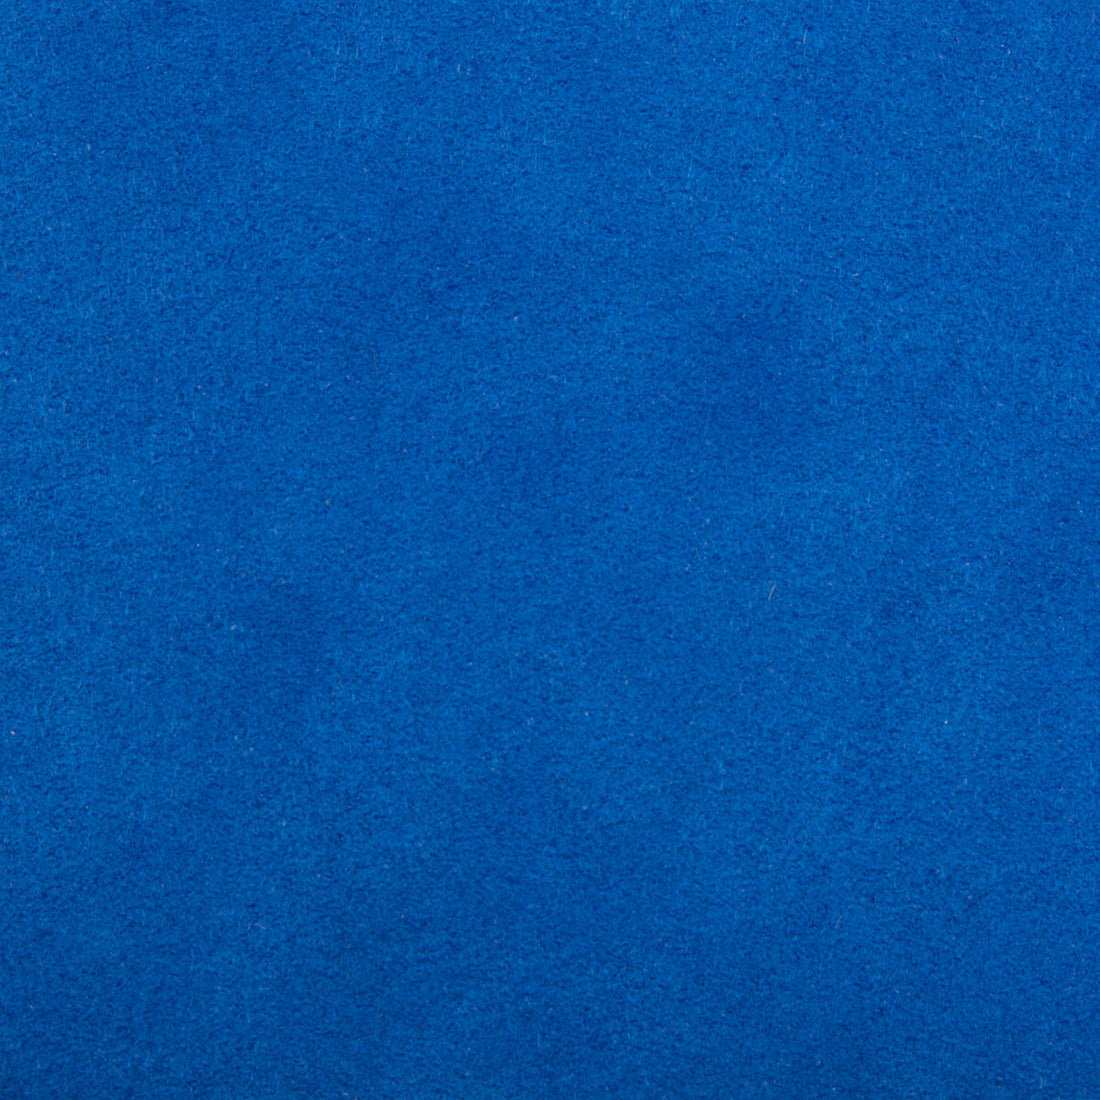 Ultrasuede fabric in baltic blue color - pattern ULTRASUEDE.55.0 - by Kravet Design in the Ultrasuede collection